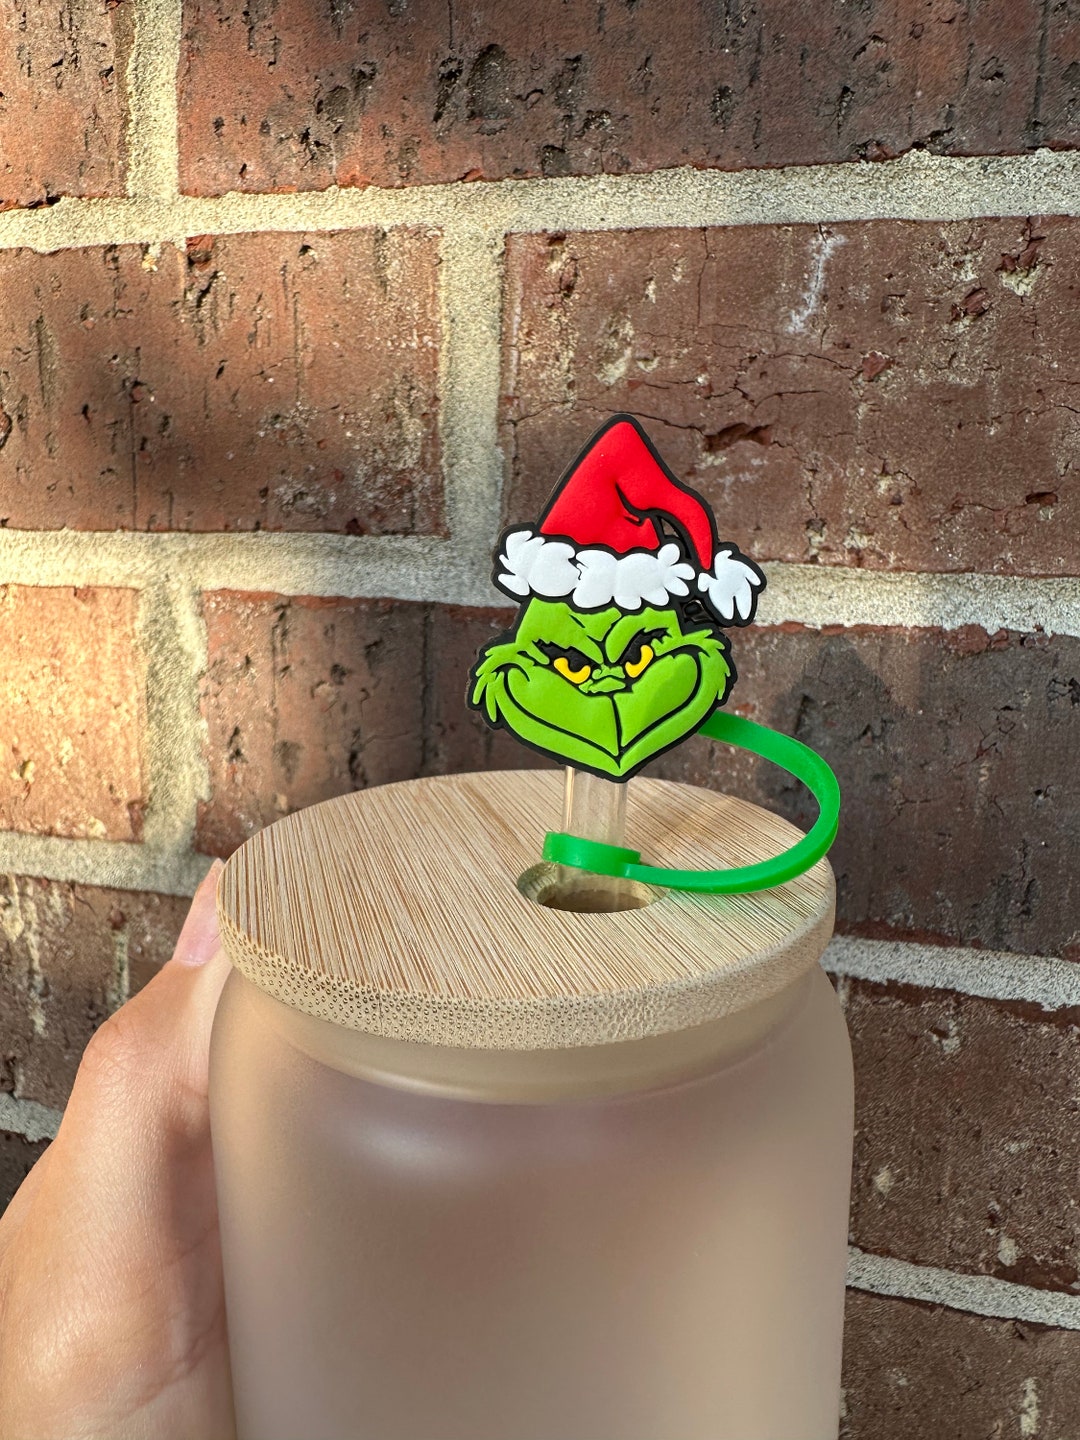 How the Grinch Stole Christmas Straw Toppers Cindy Lou Who, Grinch Works  With Stanley Cups Straw Covers, Straw Charms 